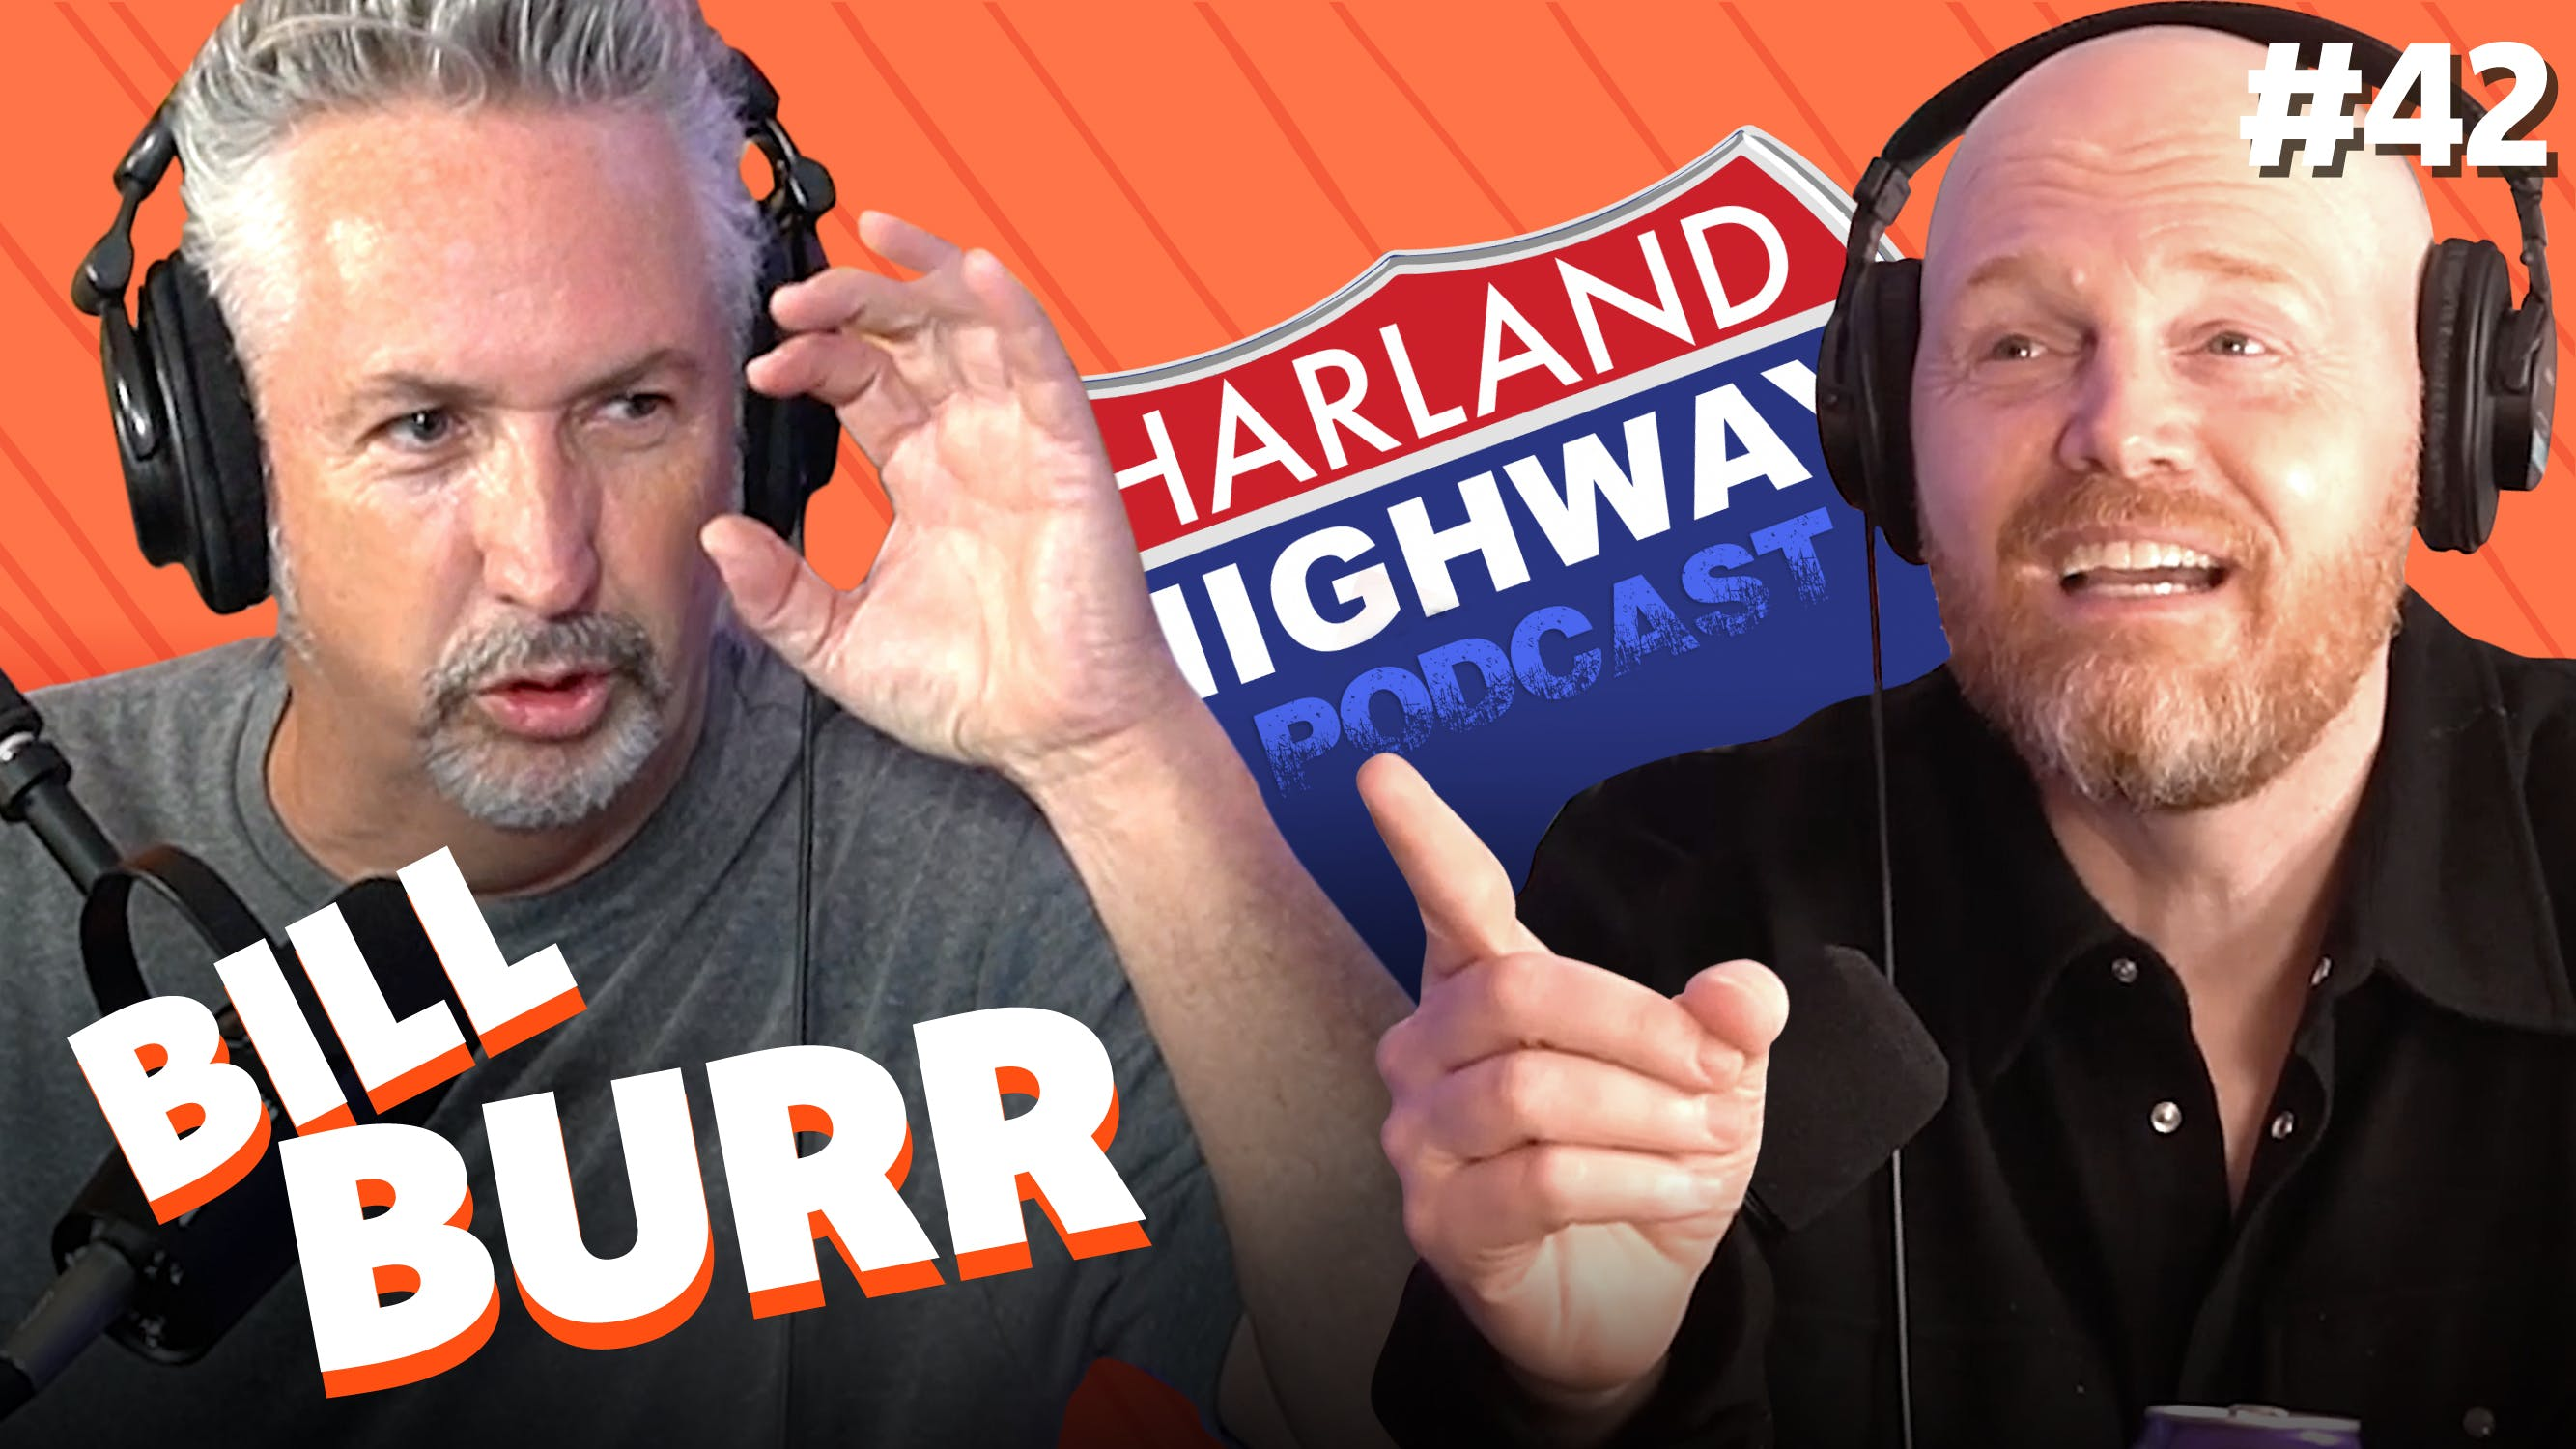 NEW HARLAND HIGHWAY #42 - BILL BURR, Comedian, Actor, Podcaster